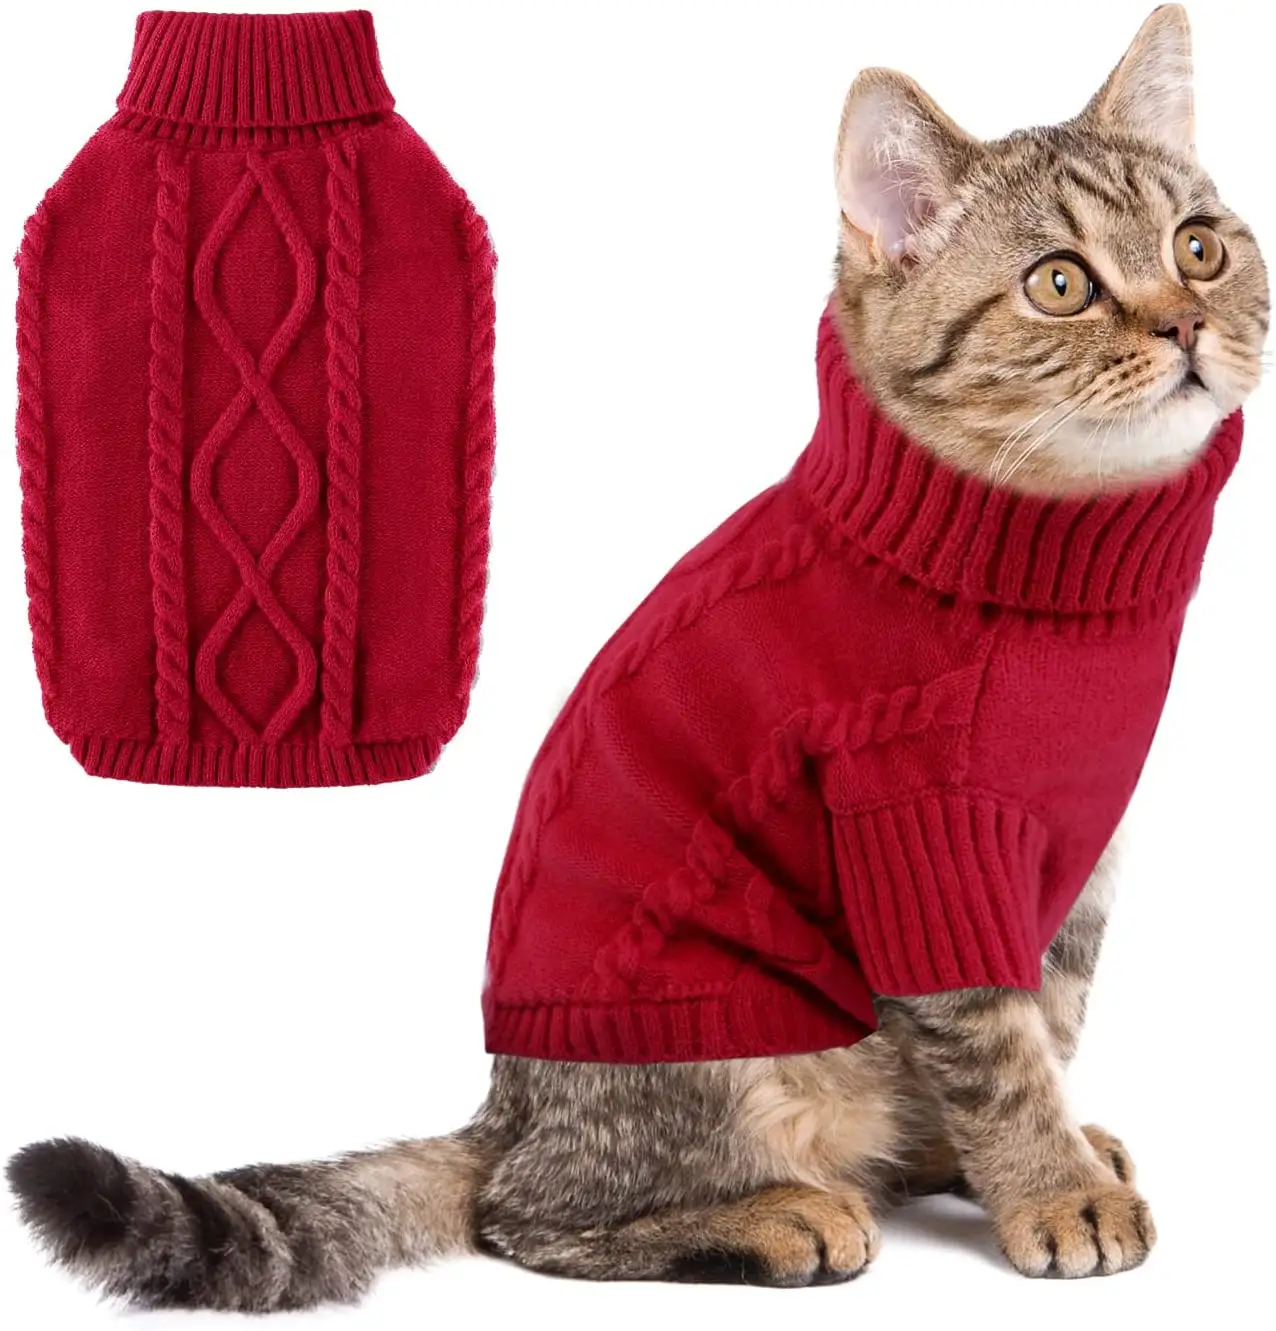 Winter Dog Sweater Puppy Clothes, Warm Fleece Cat Sweater Turtleneck Doggie Coats, Classic Pullover Knit Christmas Holiday Pet A